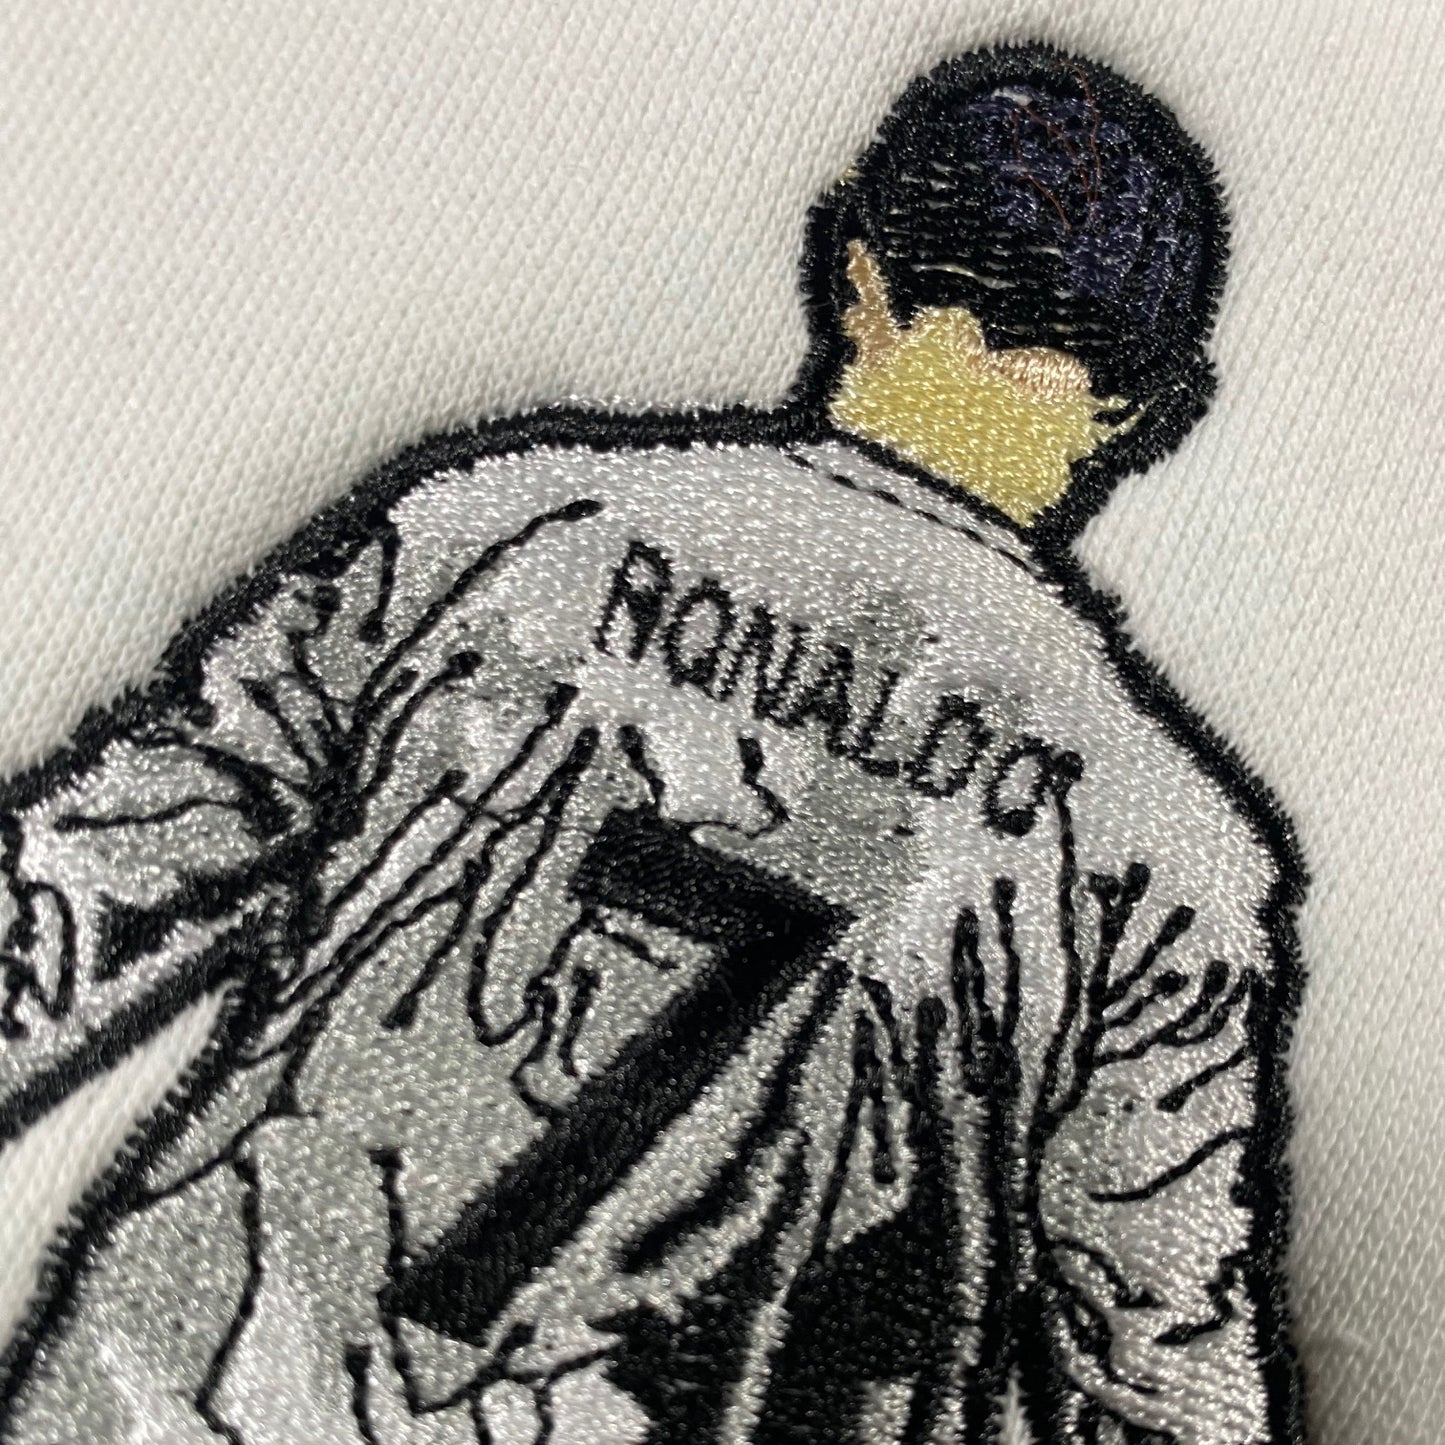 LIMITED Christiano Ronaldo X Suii EMBROIDERED SOCCER HOODIE